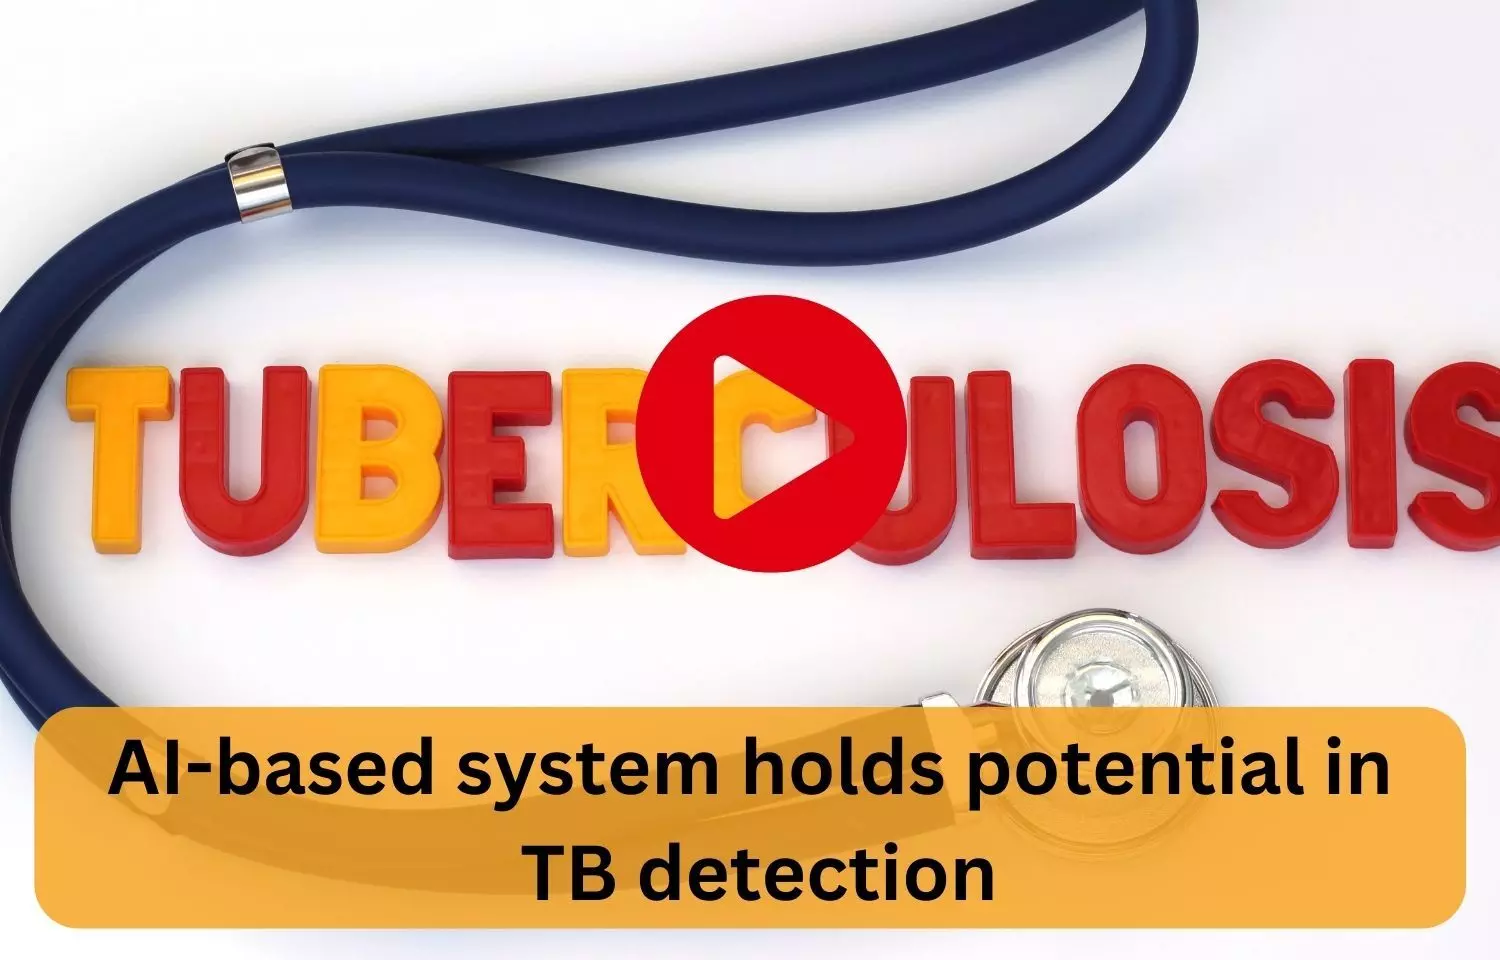 AI-based system holds potential in TB detection